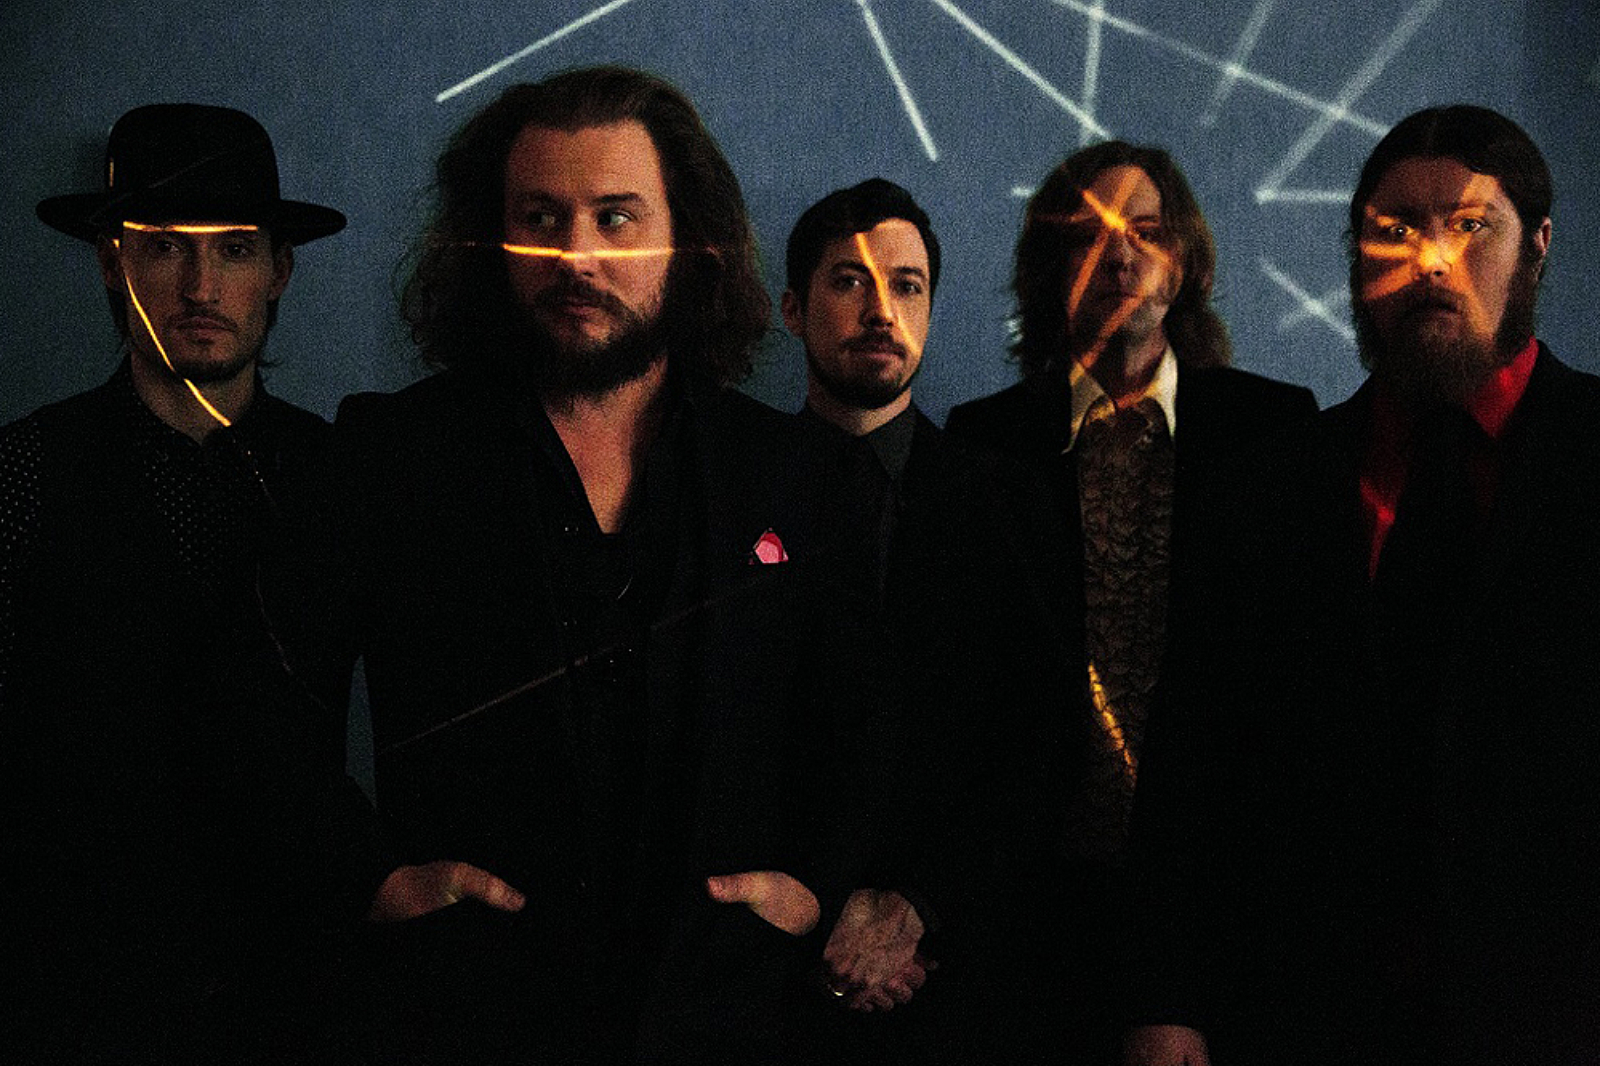 Recording on "the third moon of Jupiter", belief and outward-thinking: My Morning Jacket